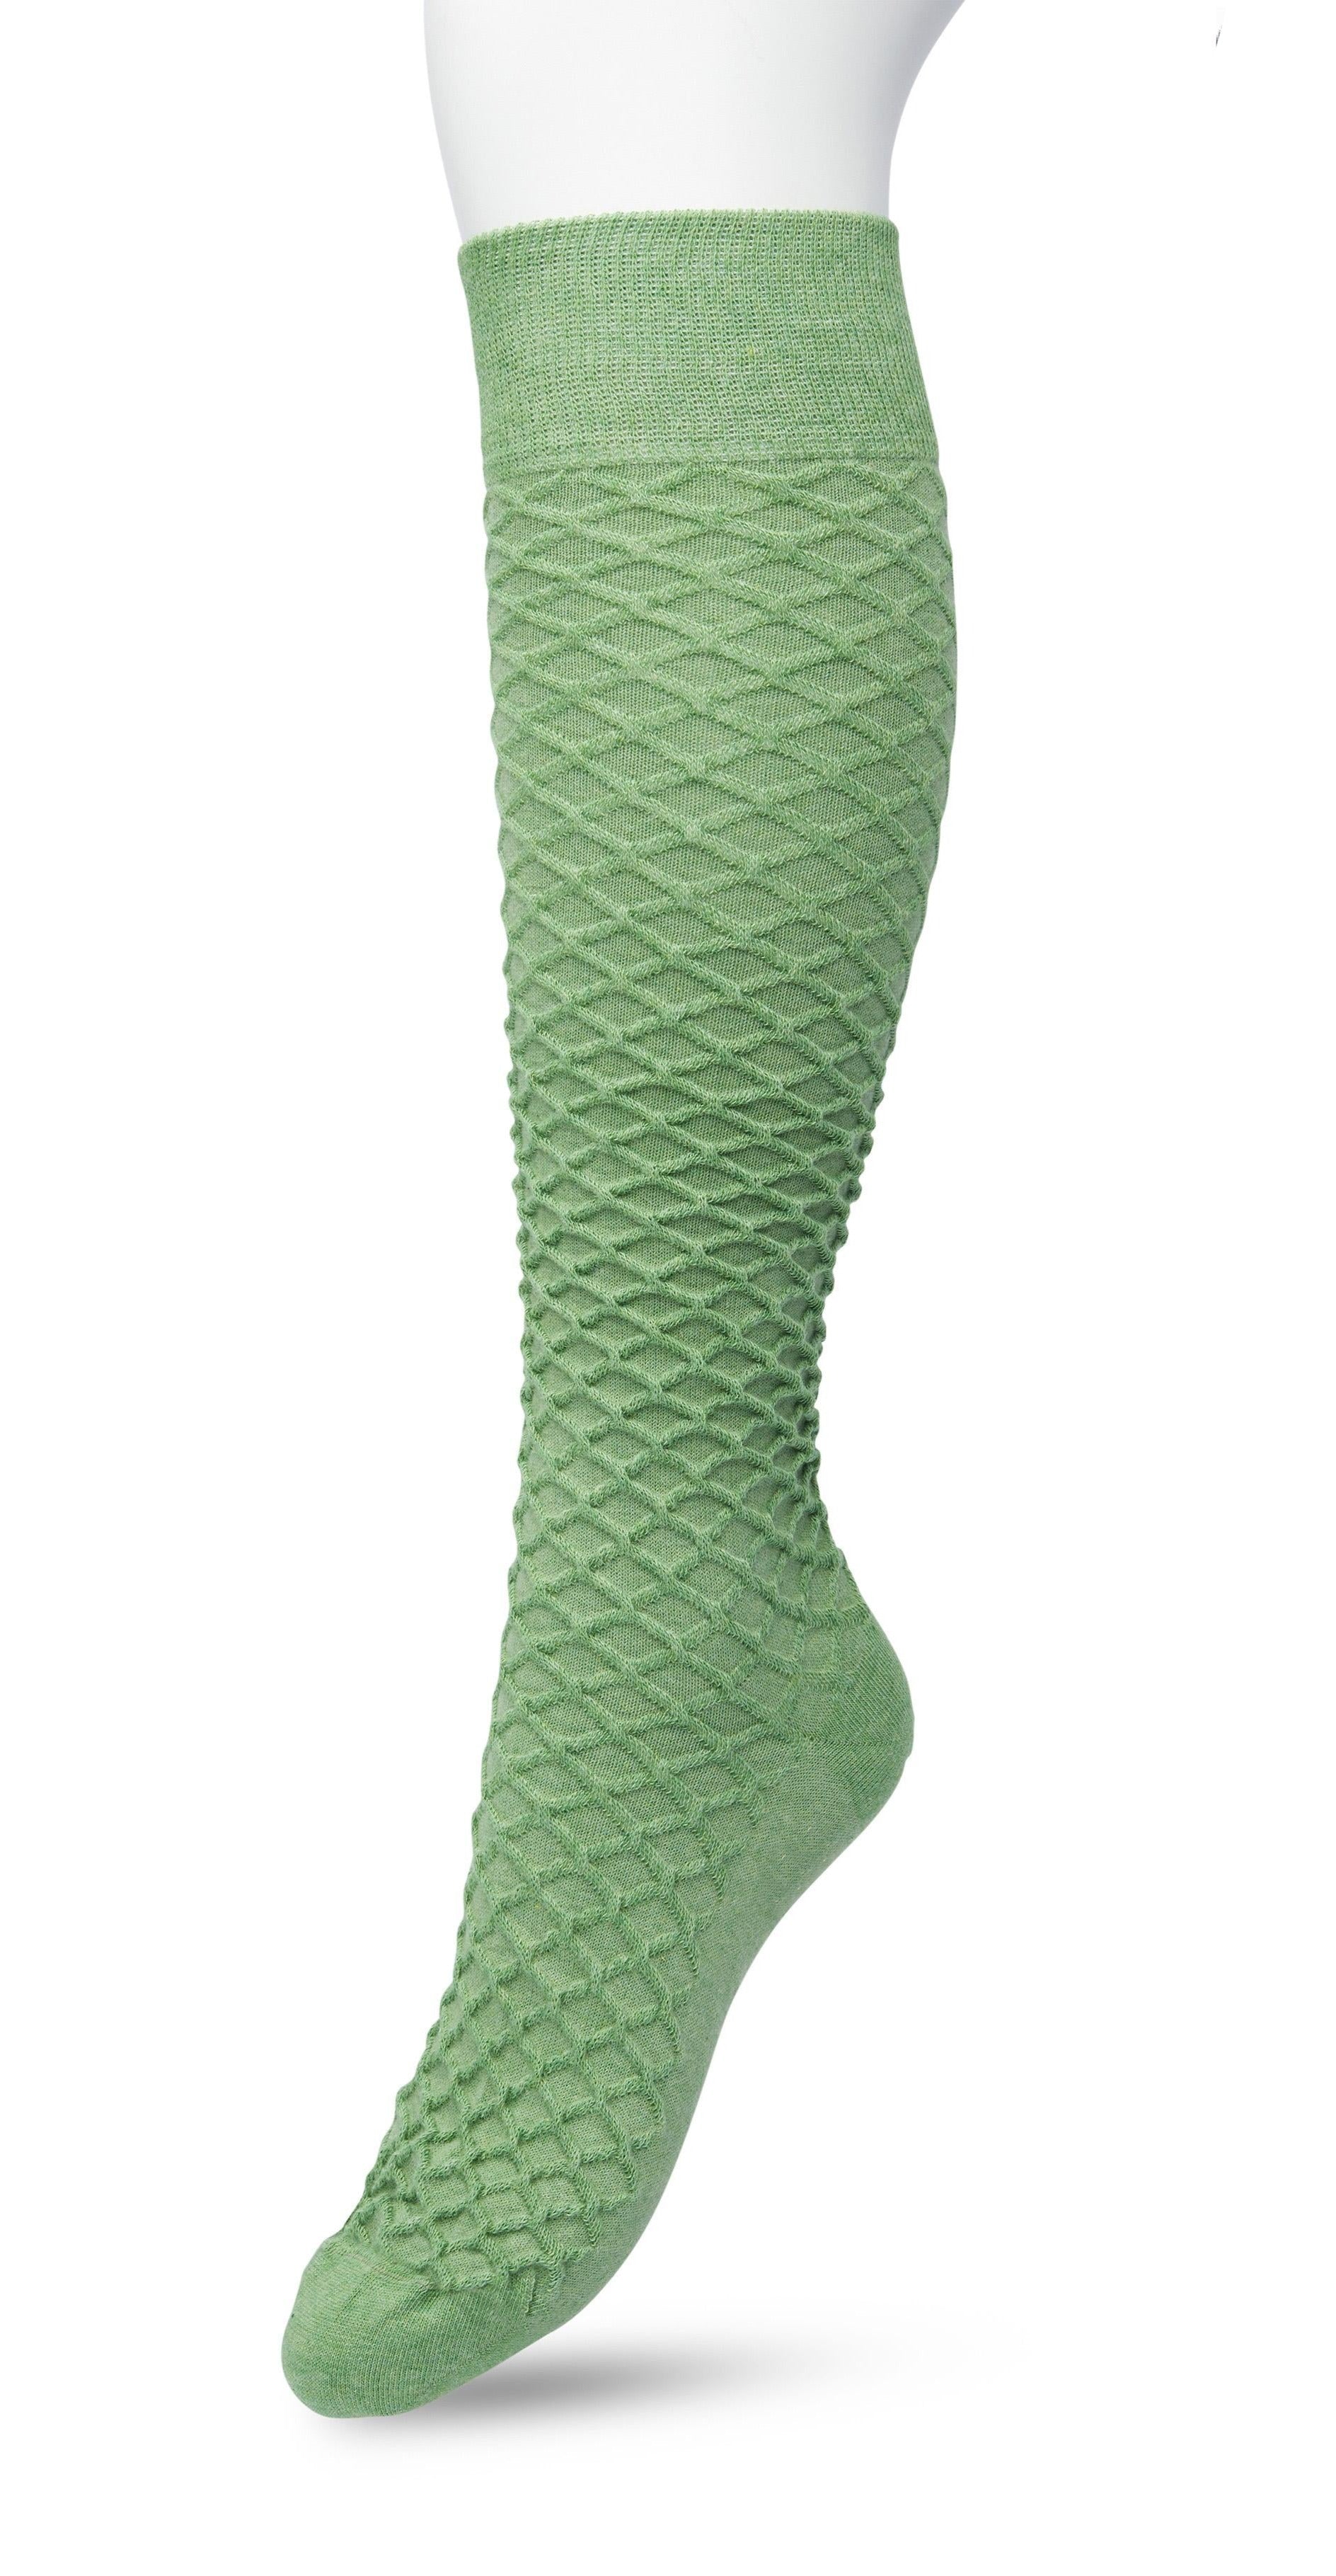 Bonnie Doon BP211506 Cable Knee-highs - Pale green (loden frost) soft and warm knitted knee-high socks with a criss-cross diamond textured pattern